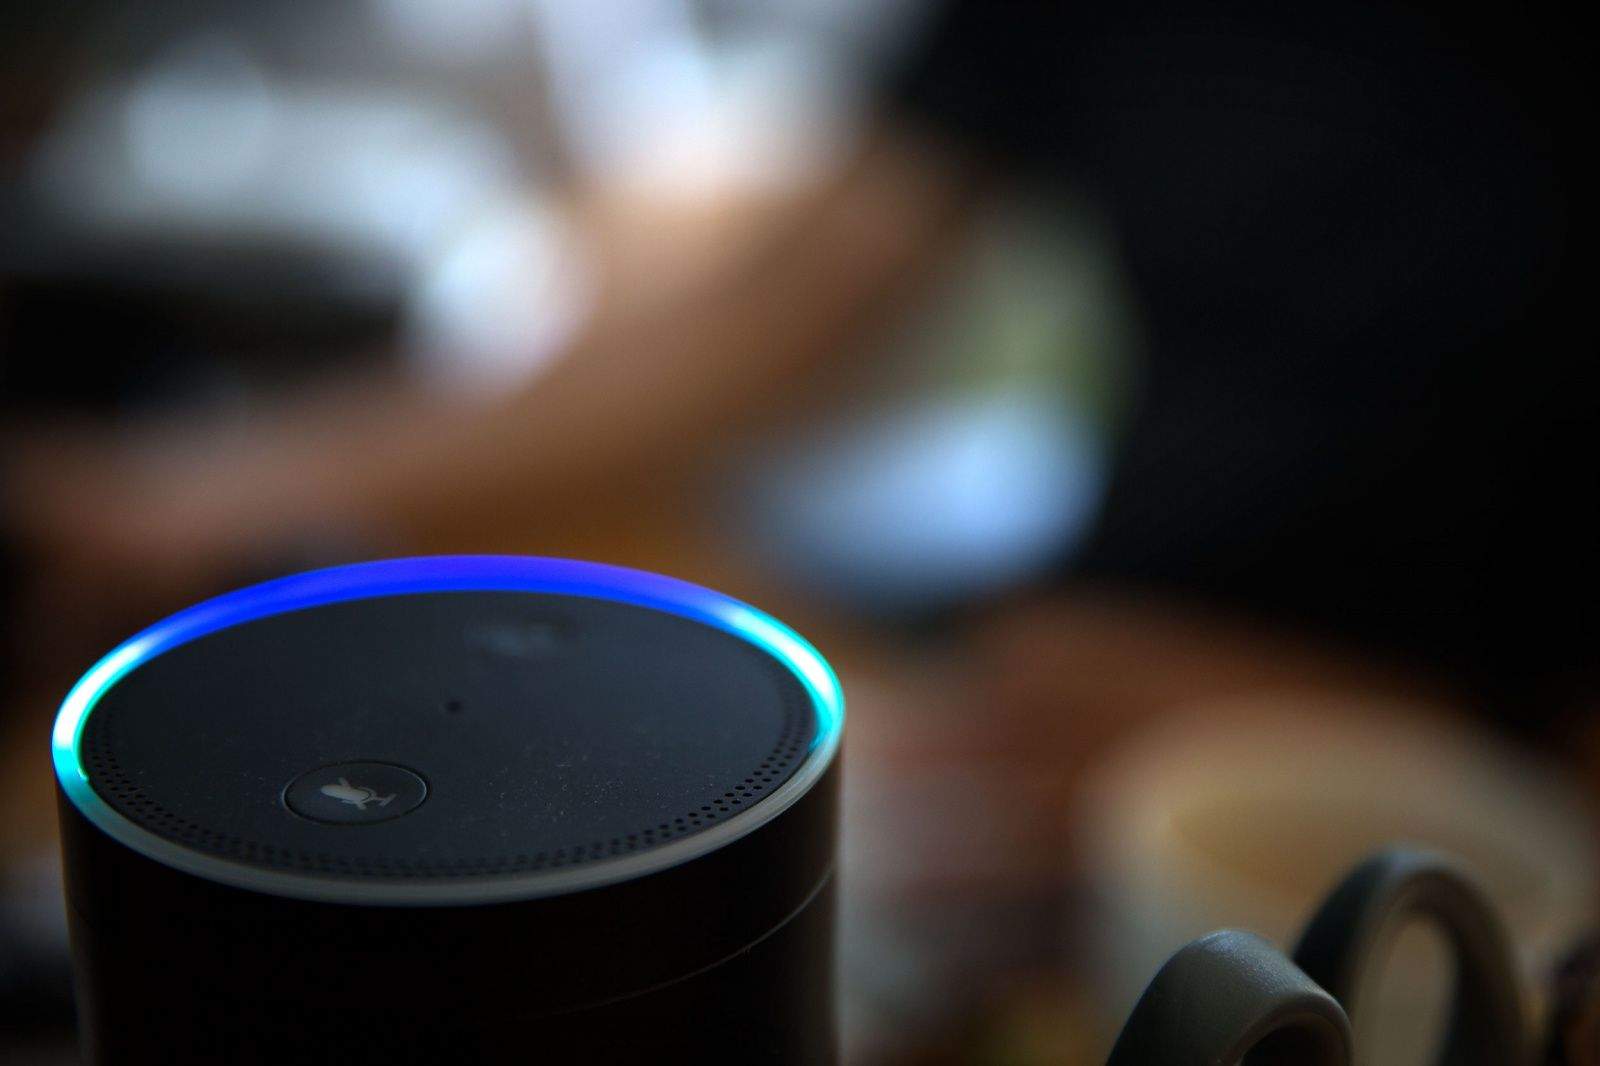 The Amazon Echo may finally have competition from Apple.